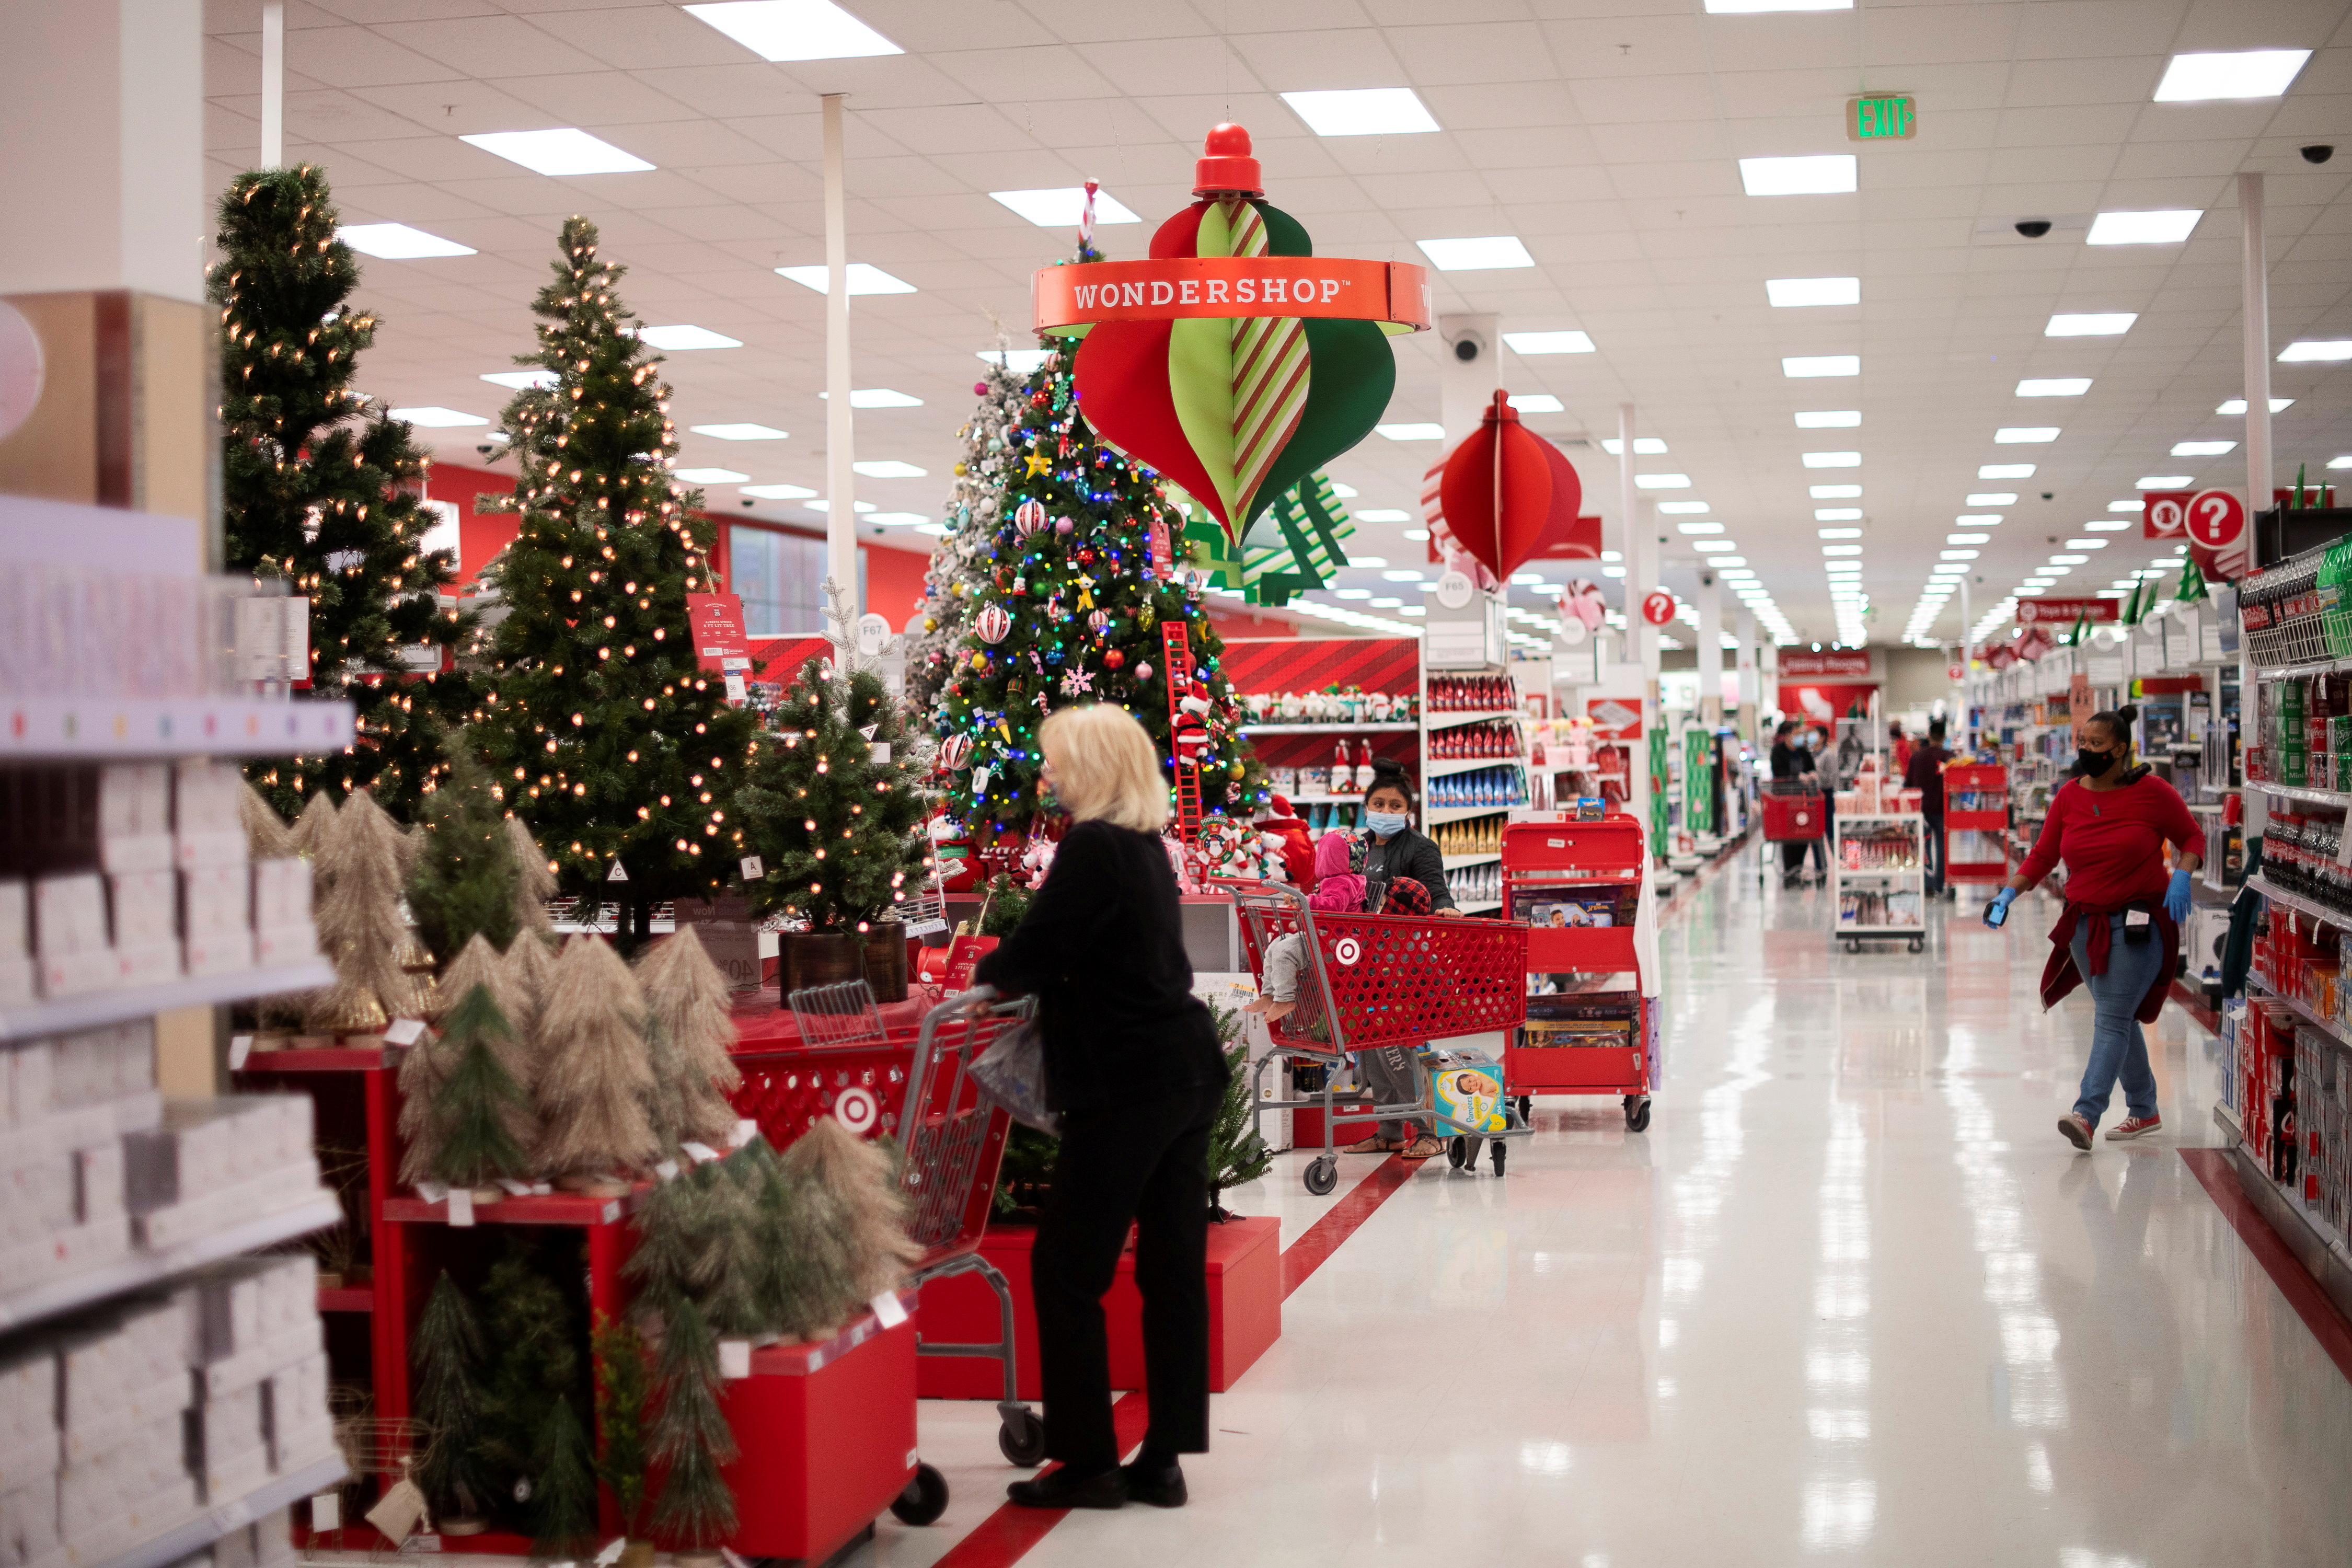 Shoppers browse merchandise beside a Christmas tree display at a Target store in King of Prussia, Pennsylvania U.S. November 20, 2020. REUTERS/Mark Makela/File Photo